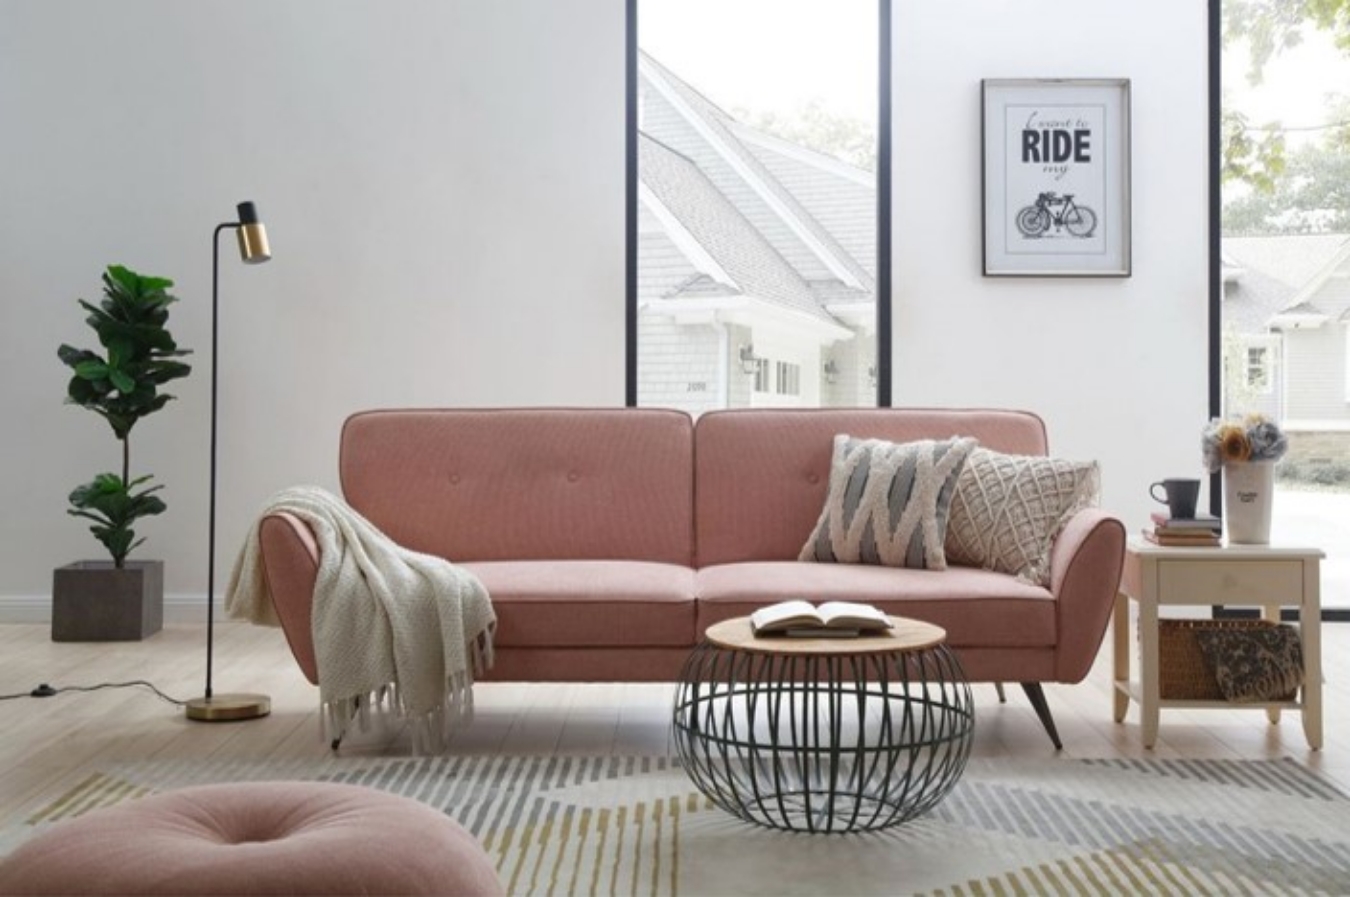 Eliane Pink 3 Seat Sofa Bed is designed specifically around the click-clack mechanism, renowned for the simple way it converts from a sofa to bed position with just a couple of clicks of the frame.